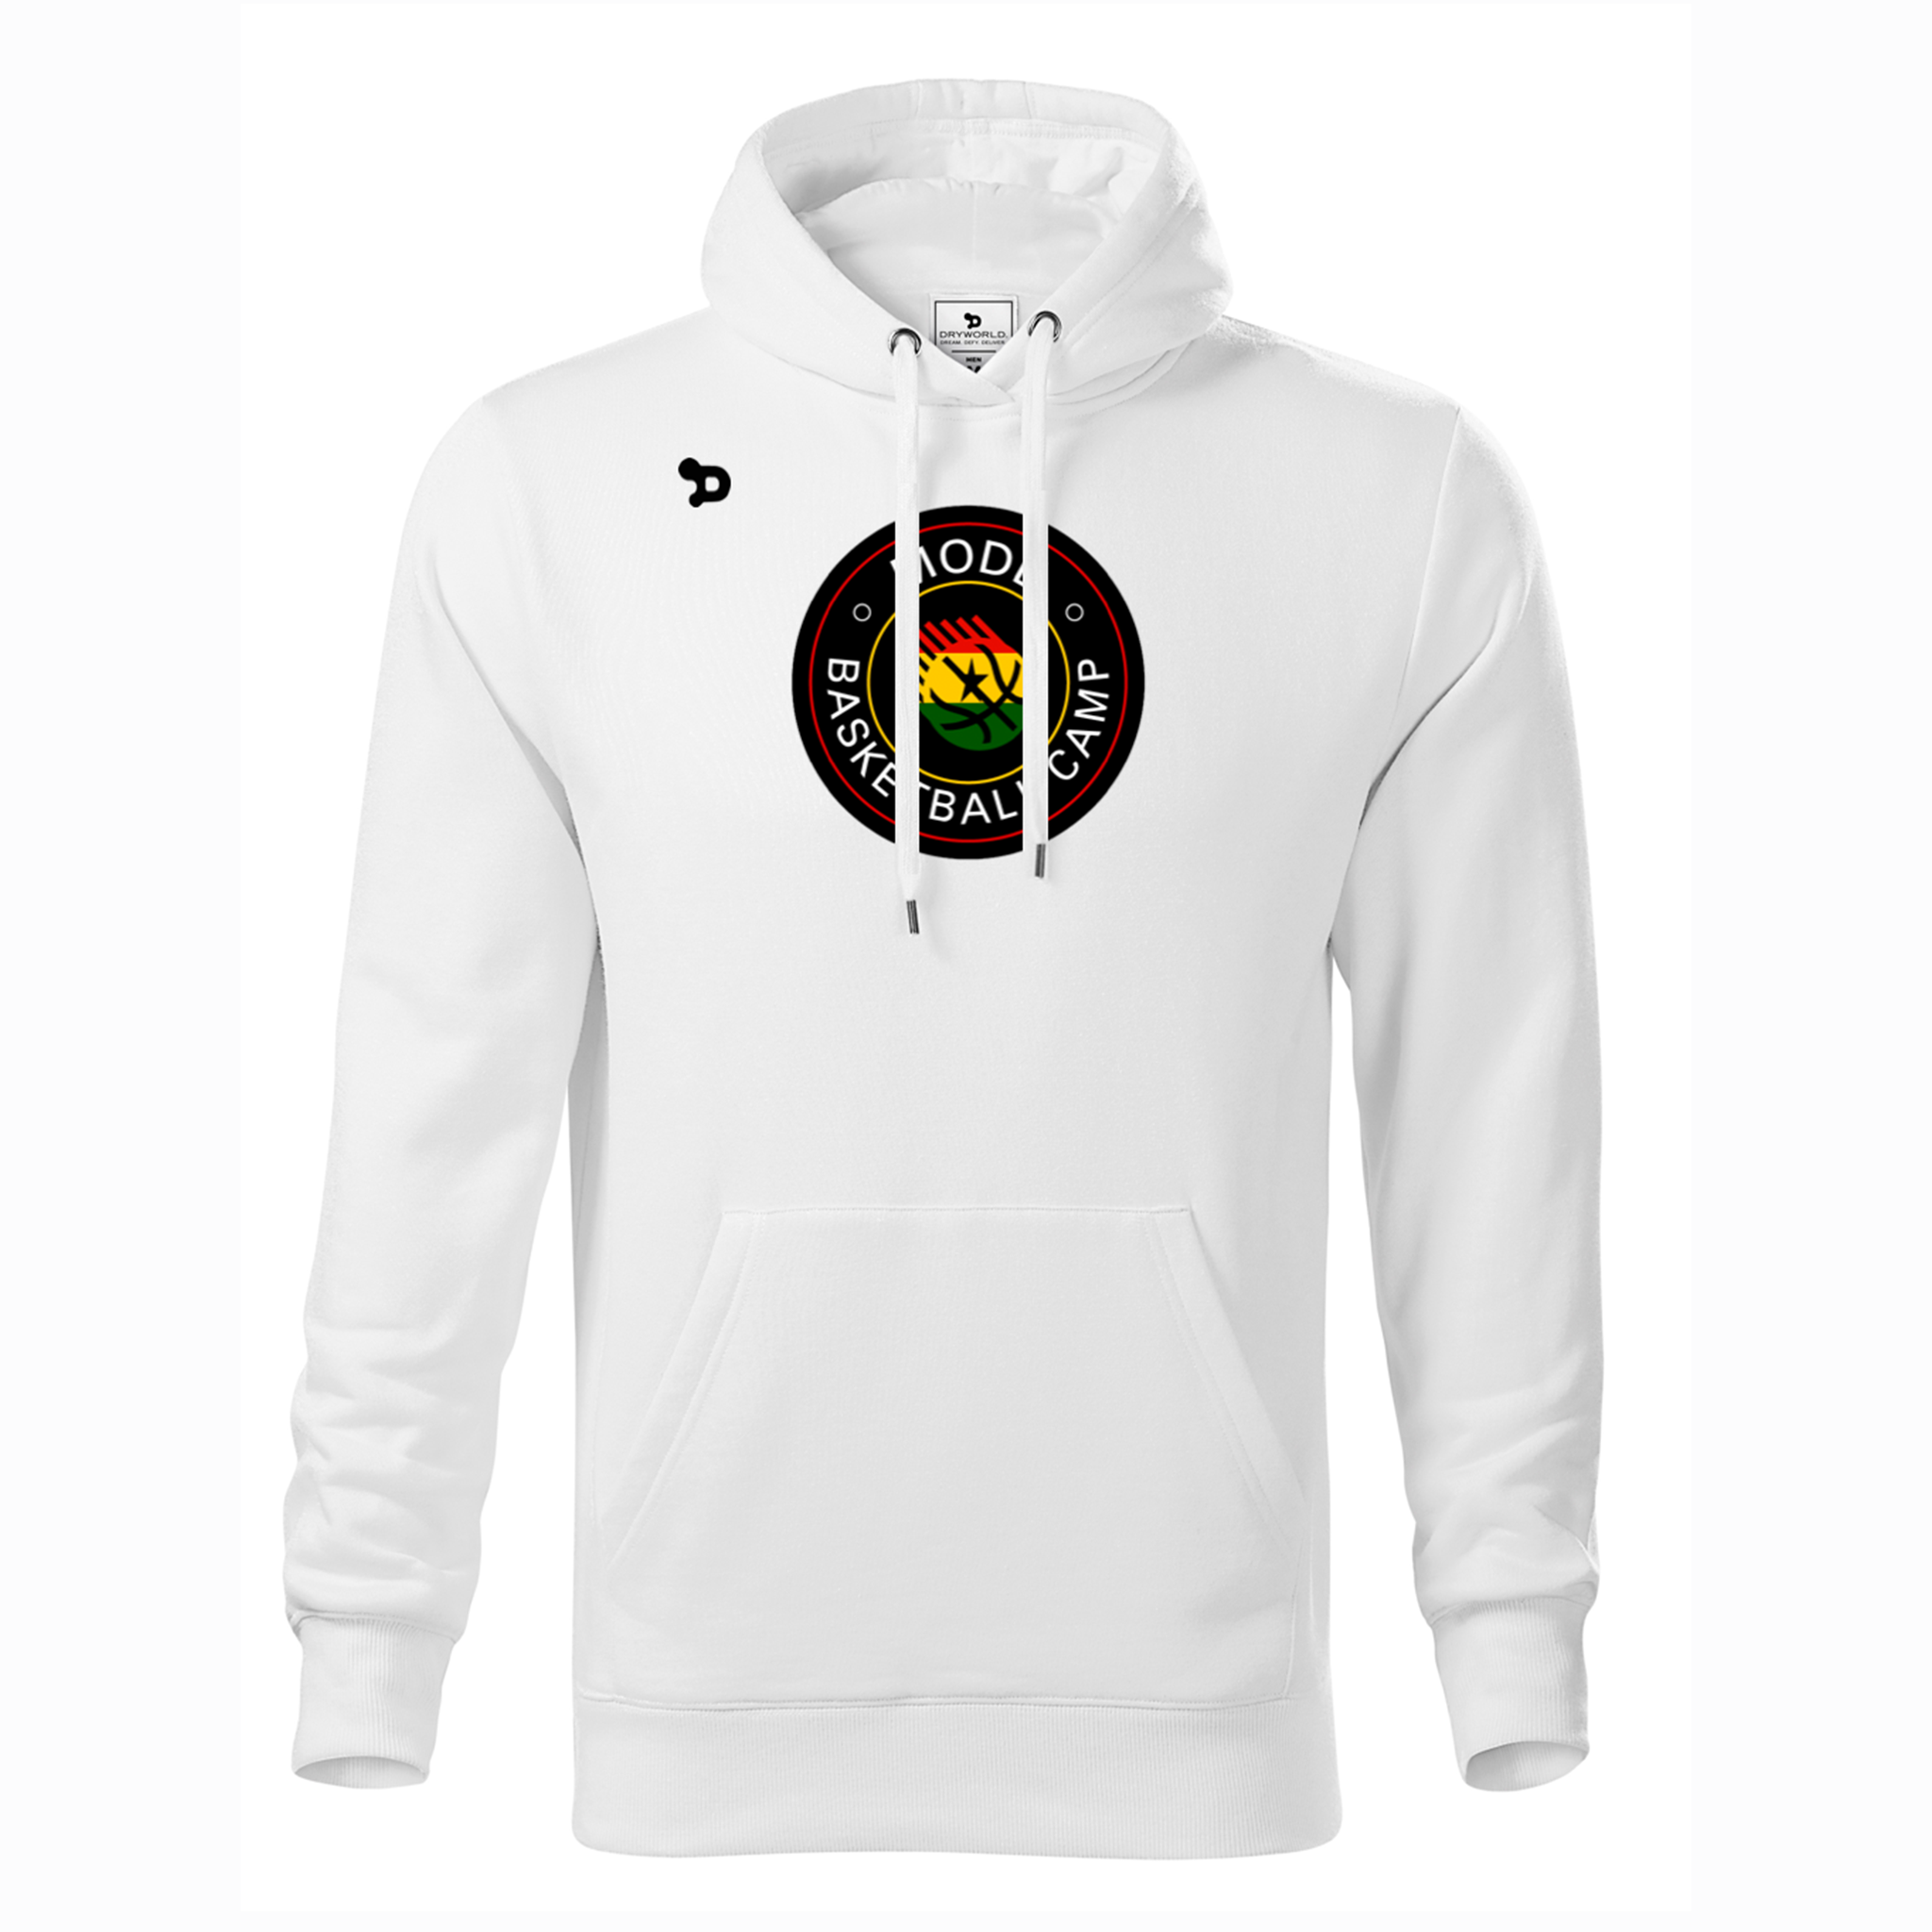 Mode_Hoodie_White_Front.png__PID:49f767c4-db48-4f1a-a298-4ac30ceabf73